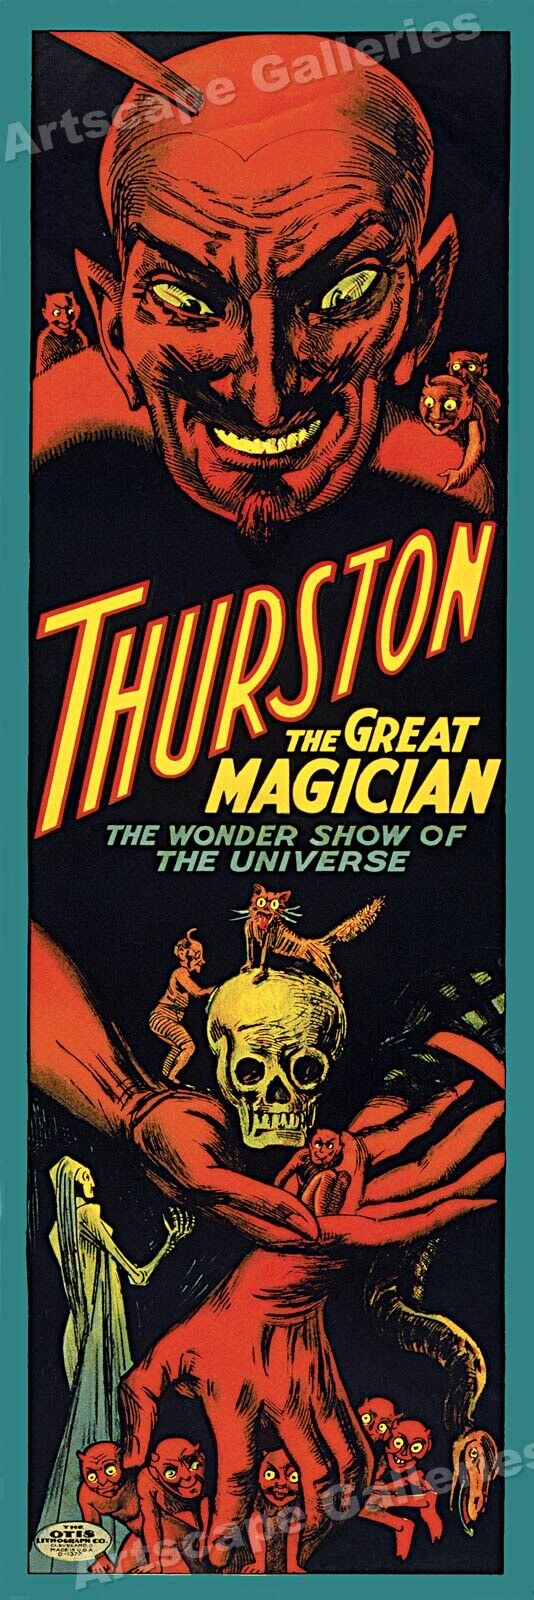 Thurston The Great Wonder Show 1914 - Classic Magic Show Poster 8x24